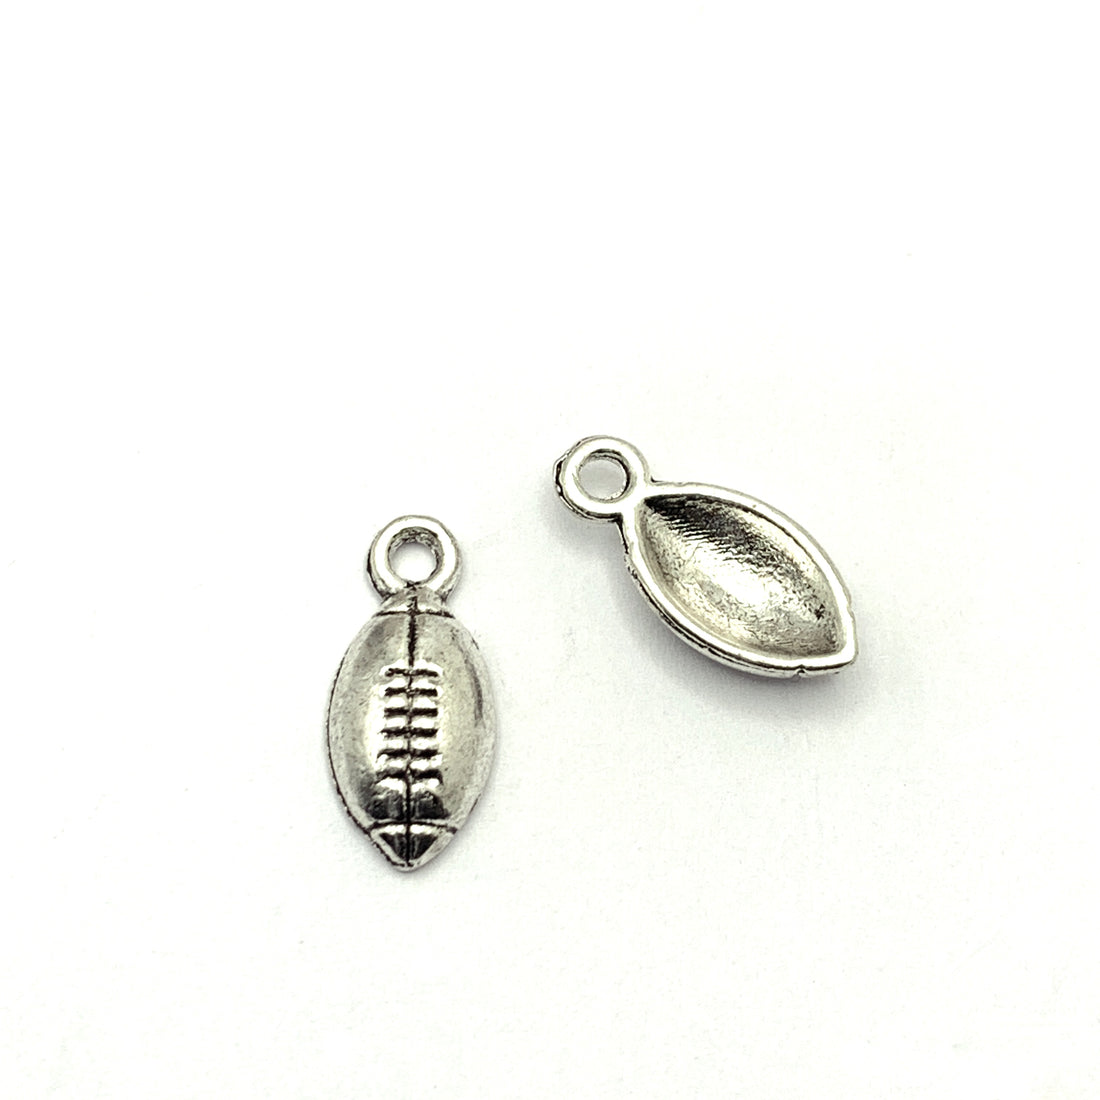 Football Antique Silver Plated Jewelry Pendant Charms, 15mm - 10